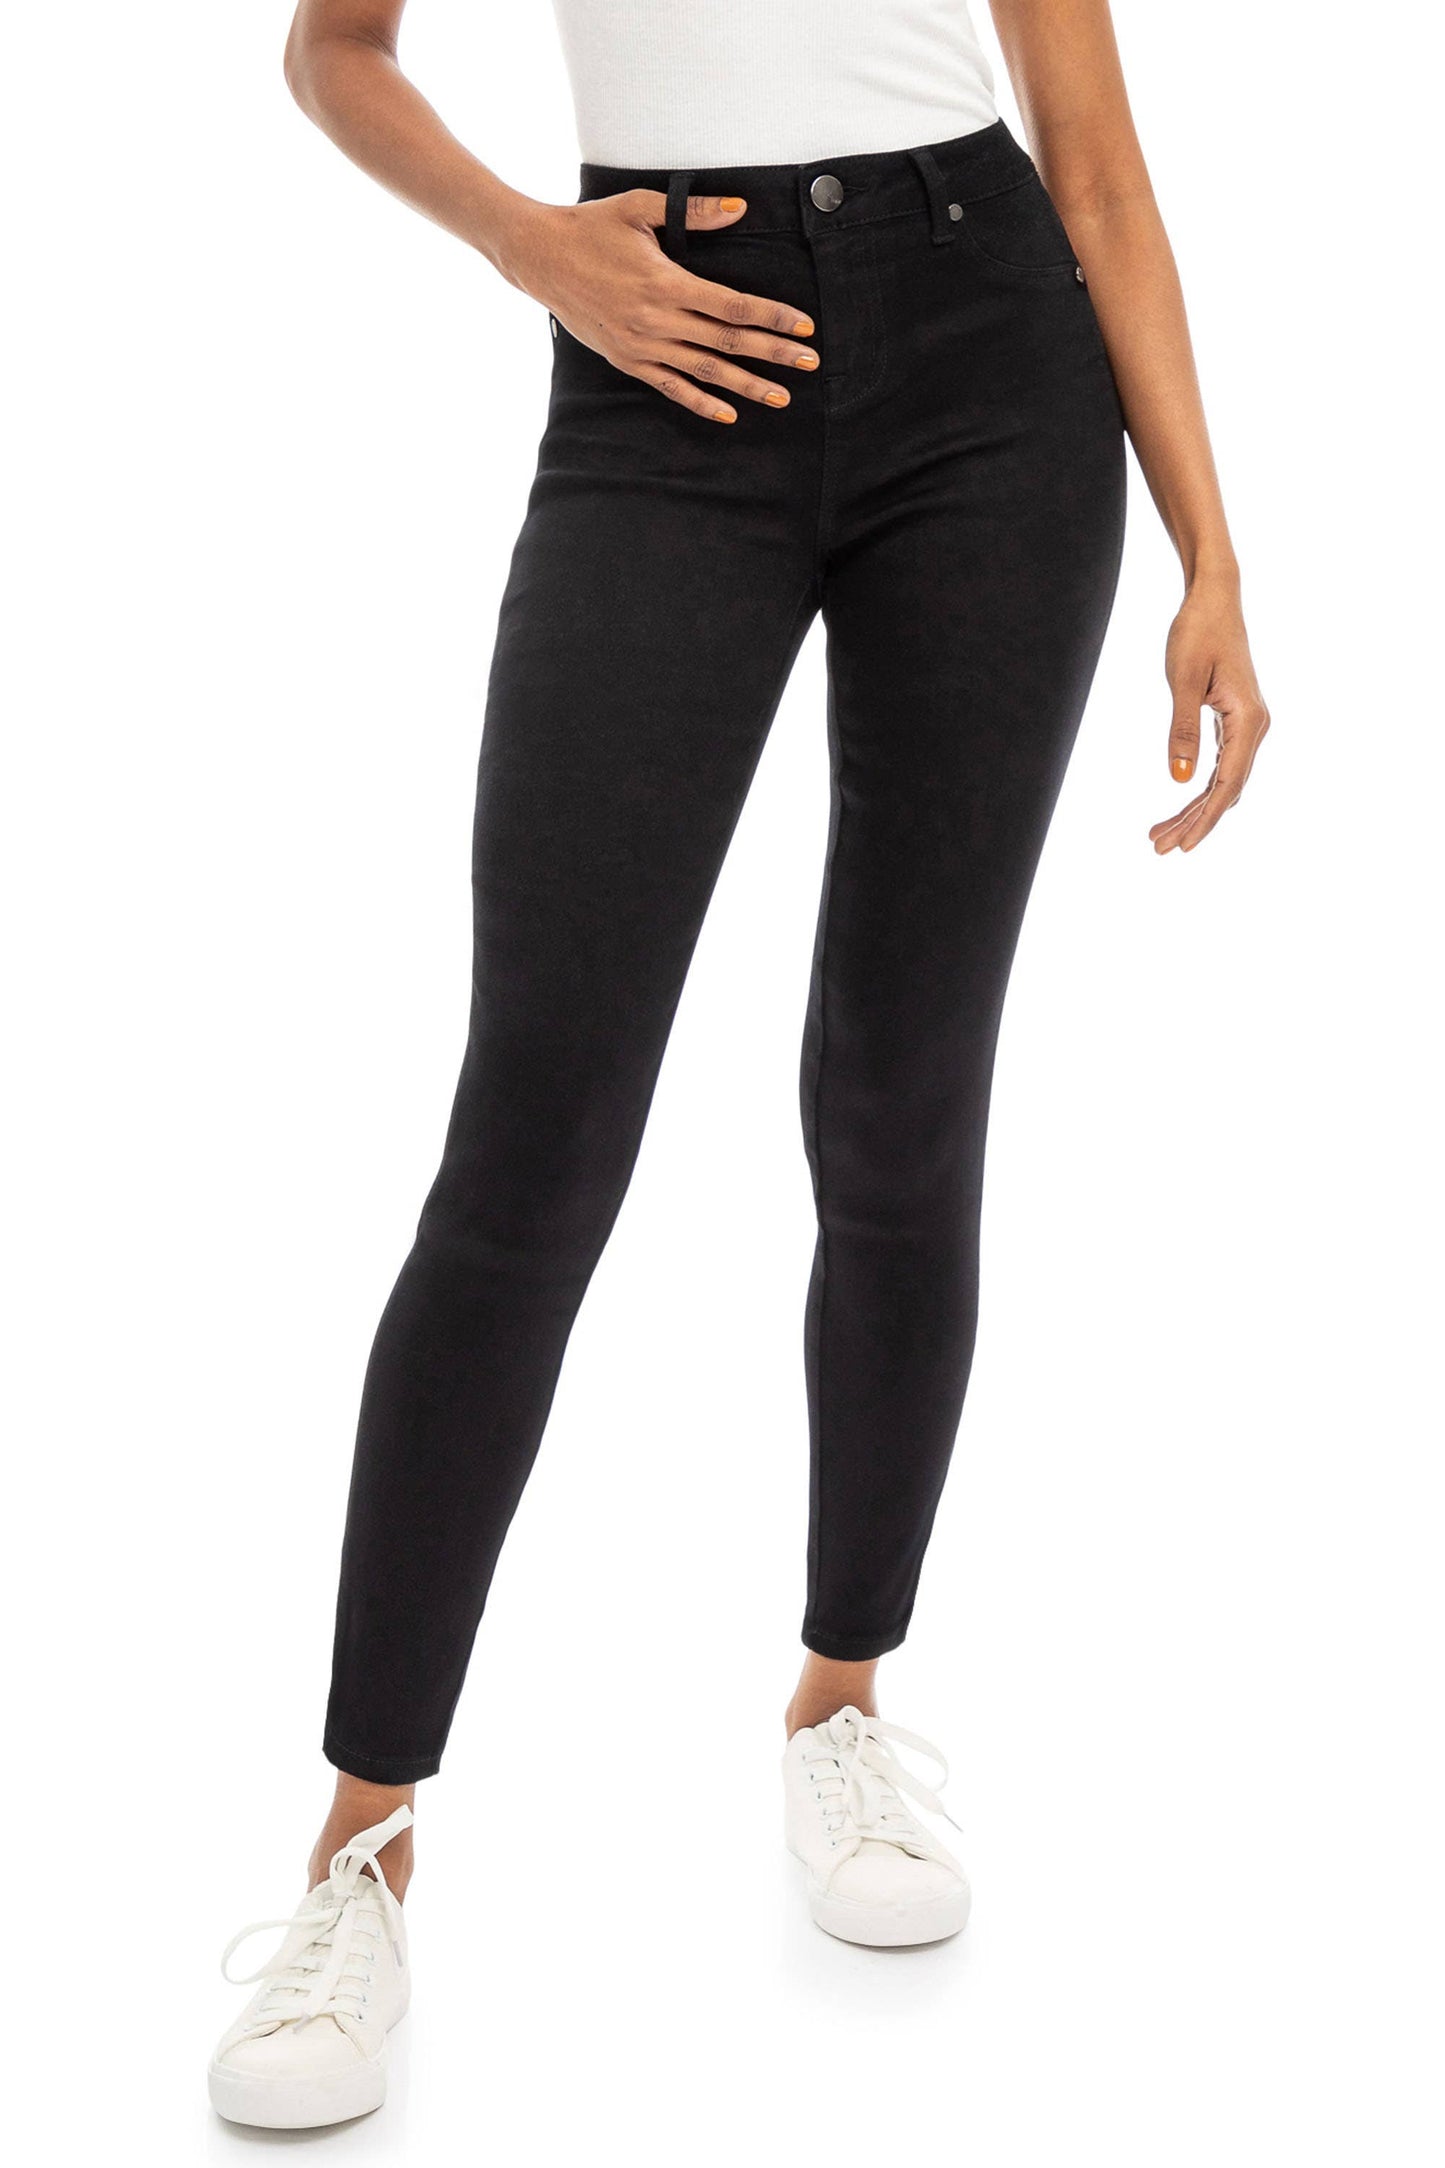 Butter High-Rise Stretch Black Skinny Jeans